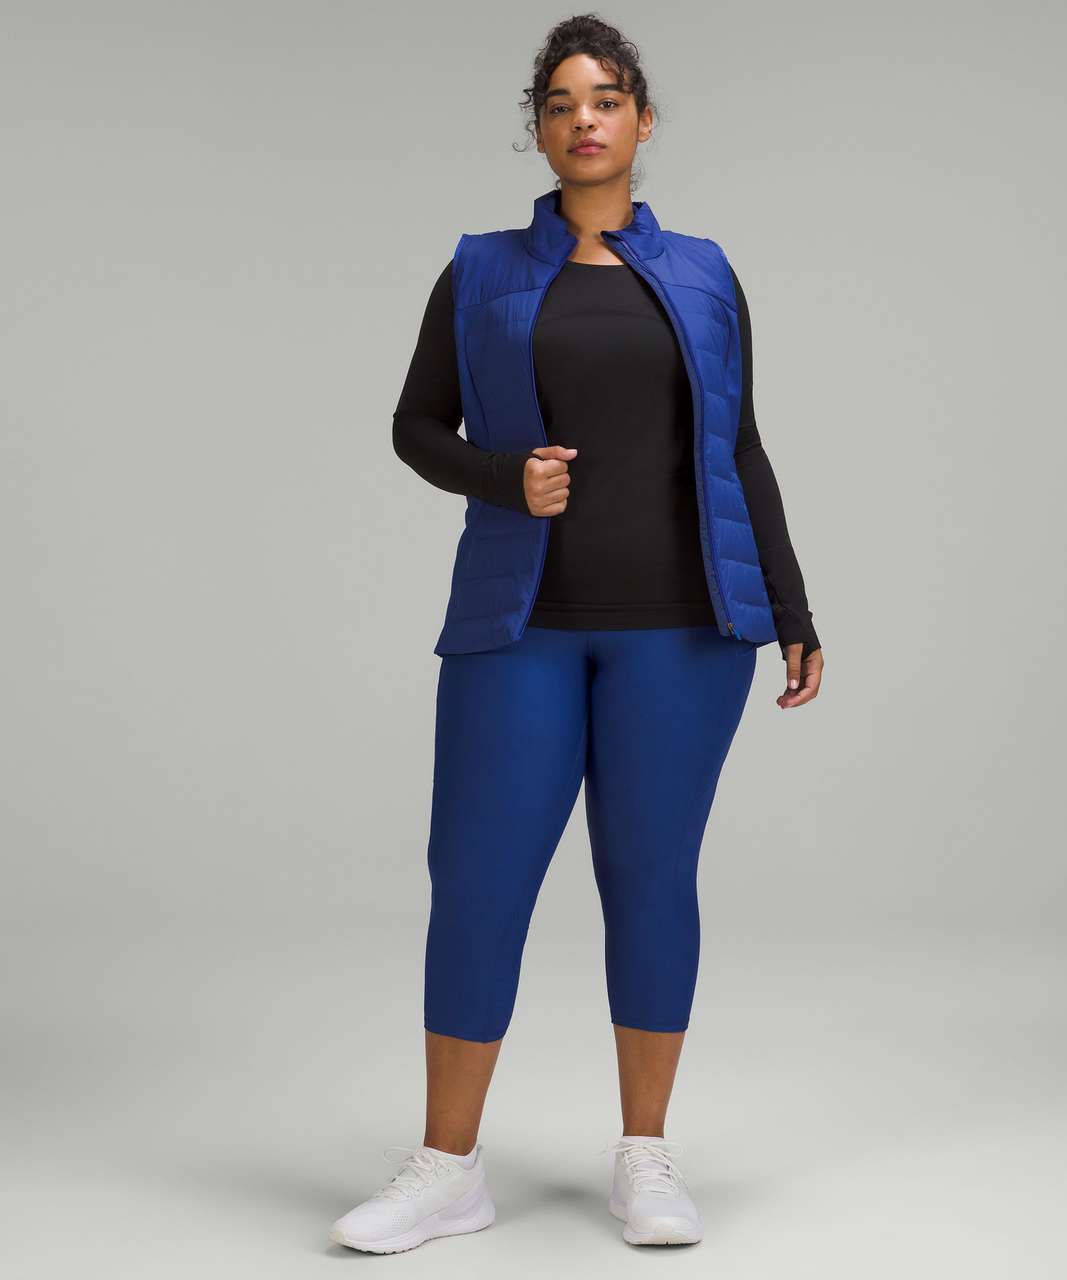 Lululemon Fast and Free High-Rise Fleece Crop 23" - Psychic